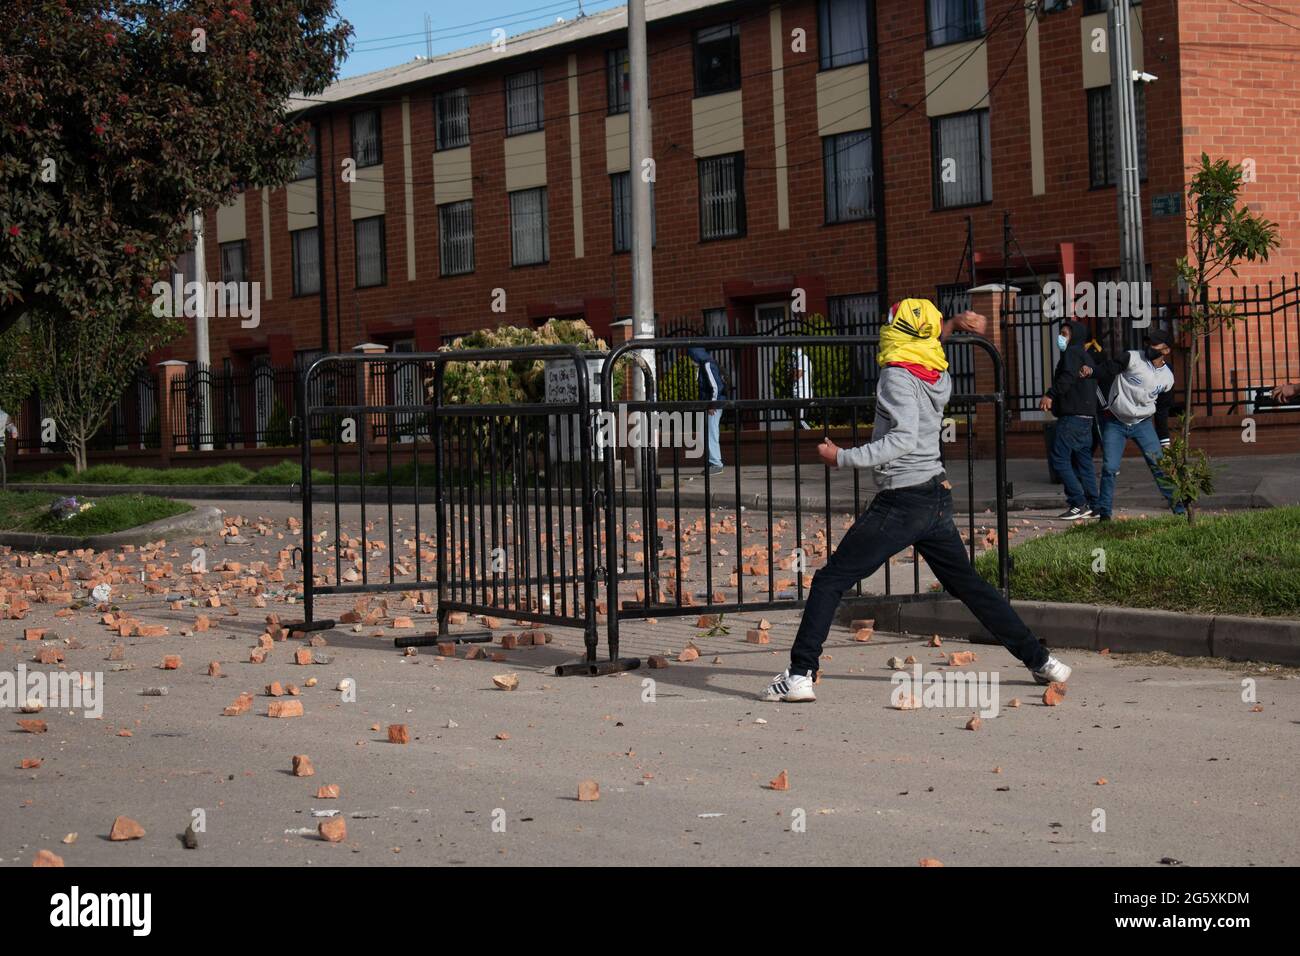 Bogota, Colombia. 29th June, 2021. A demonstrator throws rocks and debree to Colombia's riot police (ESMAD) as people of Fontanar - Suba in Bogota, Colombia protested and clashed against Colombia's riot police (Escuadron Movil Antidisturbios ESMAD) against the visit of Colombia's president Ivan Duque Marquez to a park were Bogota's metro system will be built, amidst two months of anti-government protests against president Ivan Duque Marquez, inequalities and police unrest during the protests, on June 29, 2021. Credit: Long Visual Press/Alamy Live News Stock Photo